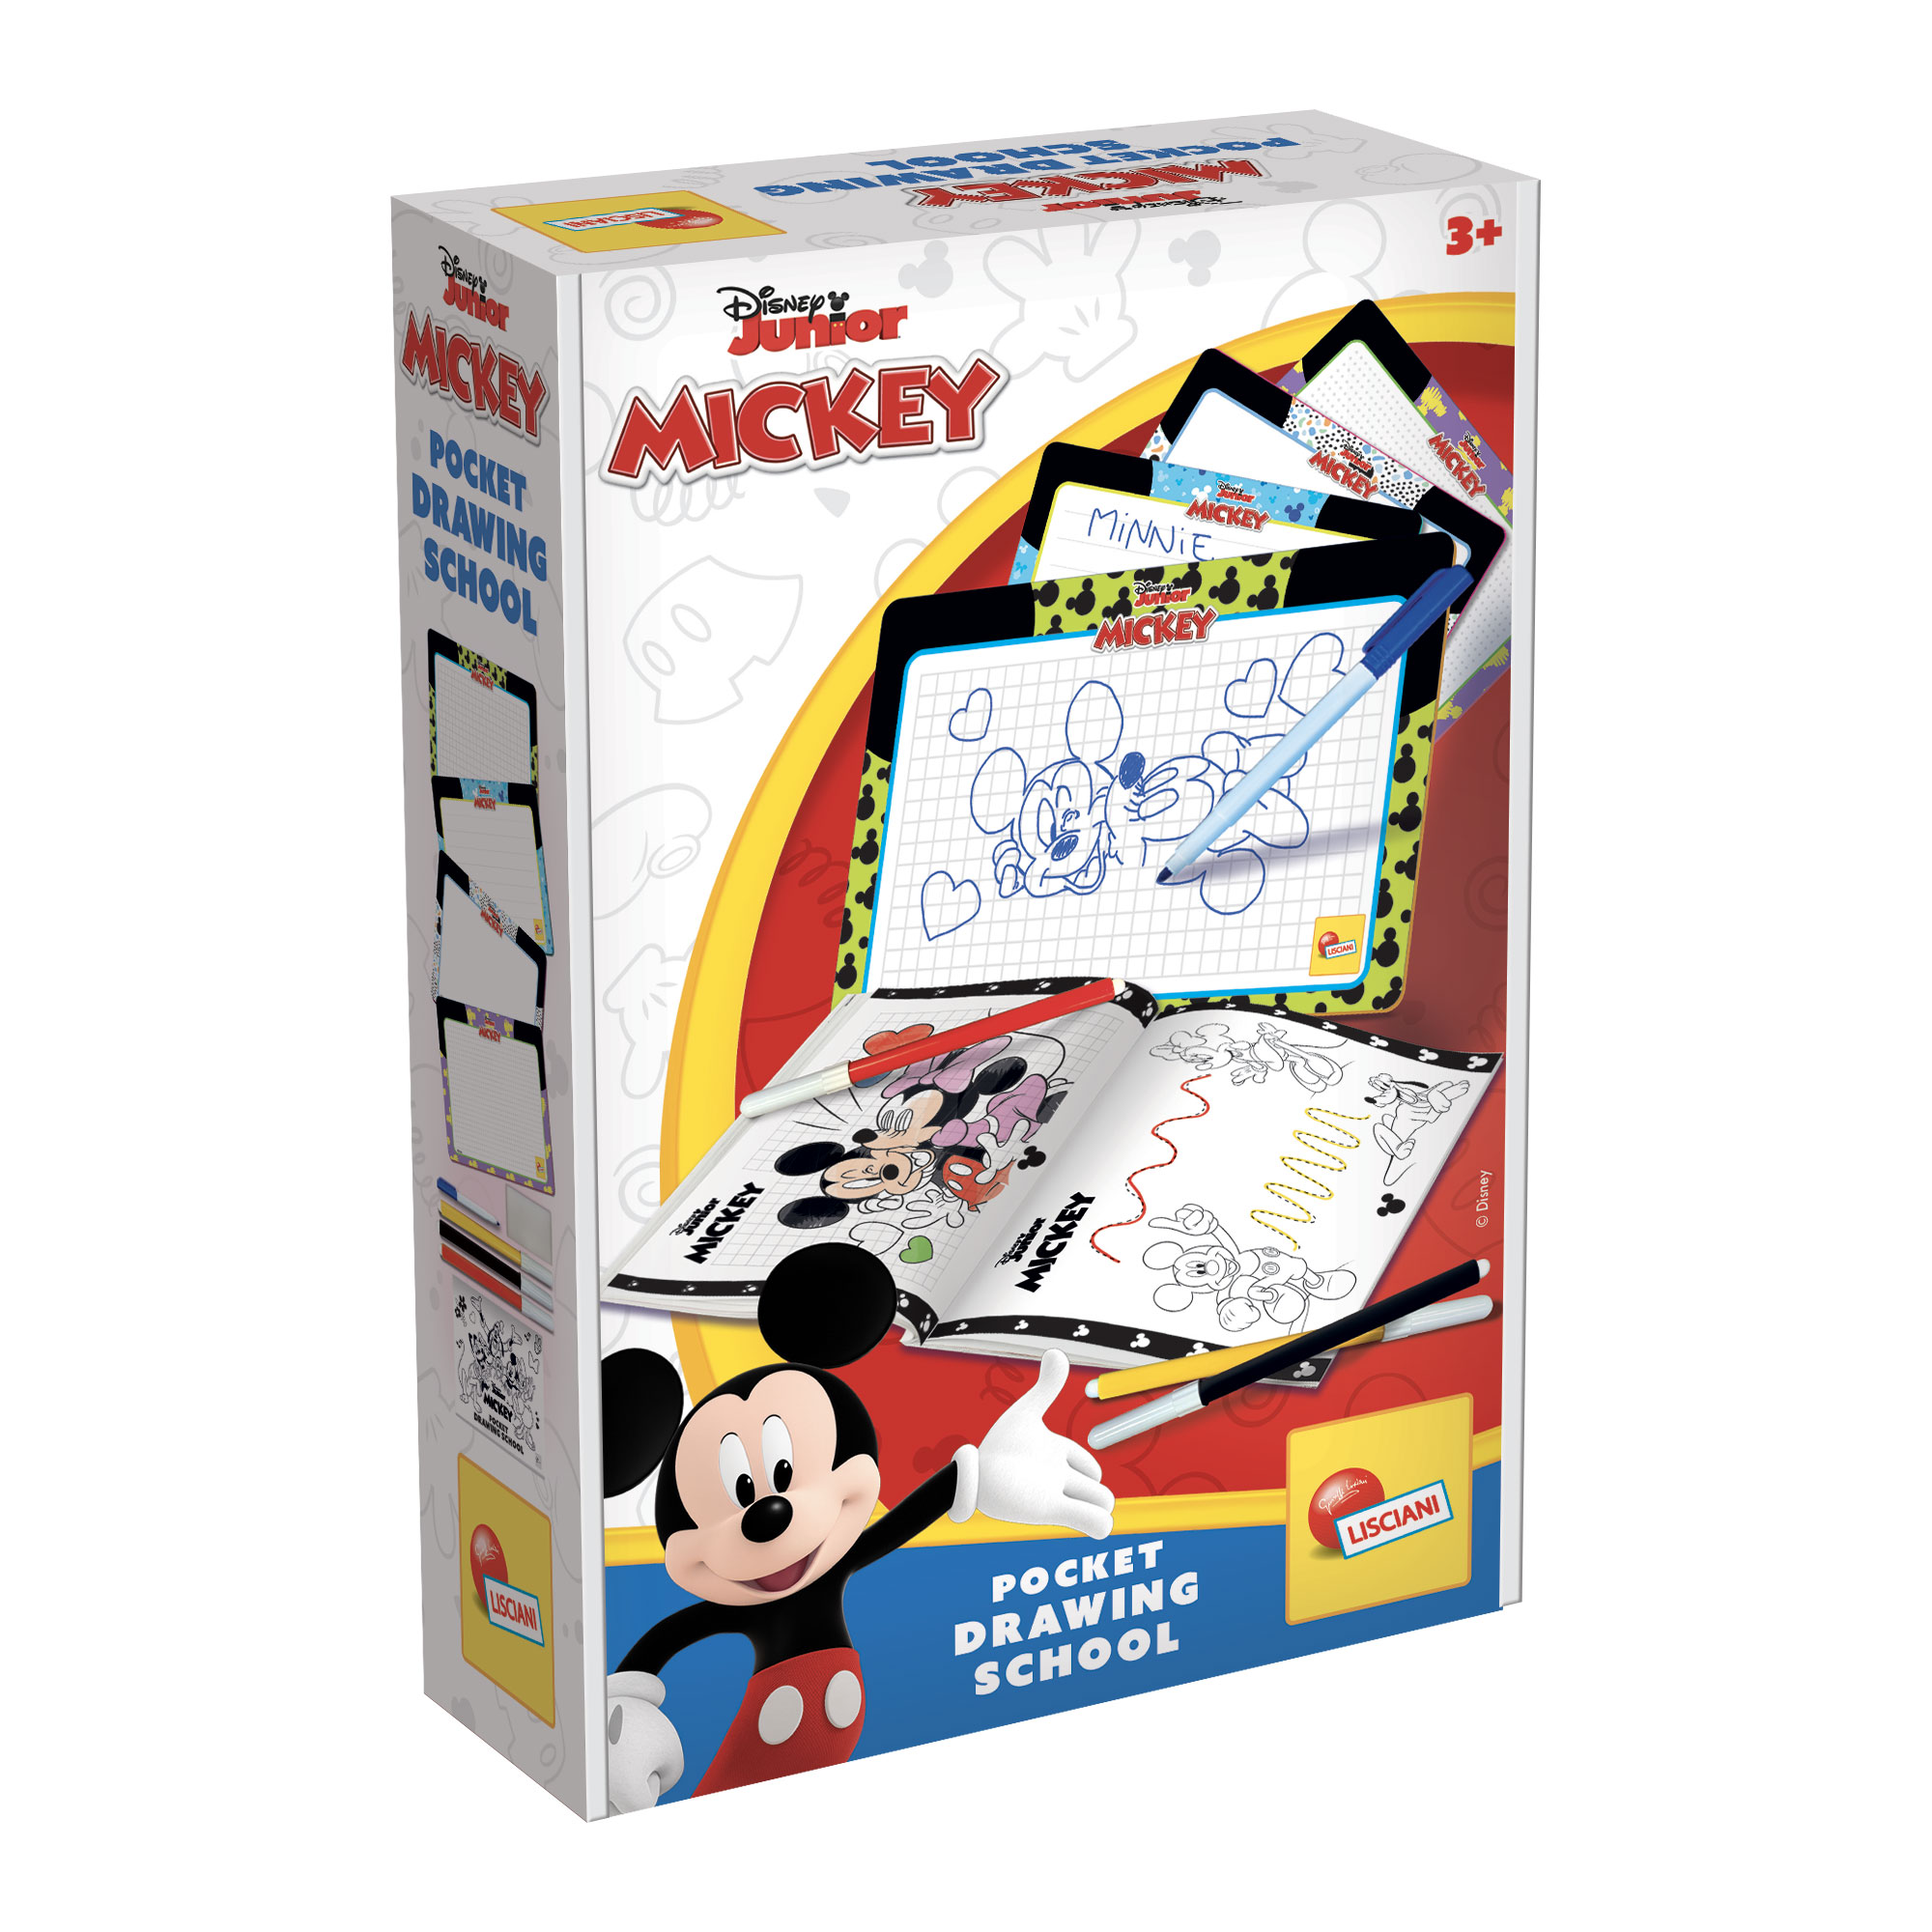 Photo 1 of the game MICKEY POCKET DRAWING SCHOOL